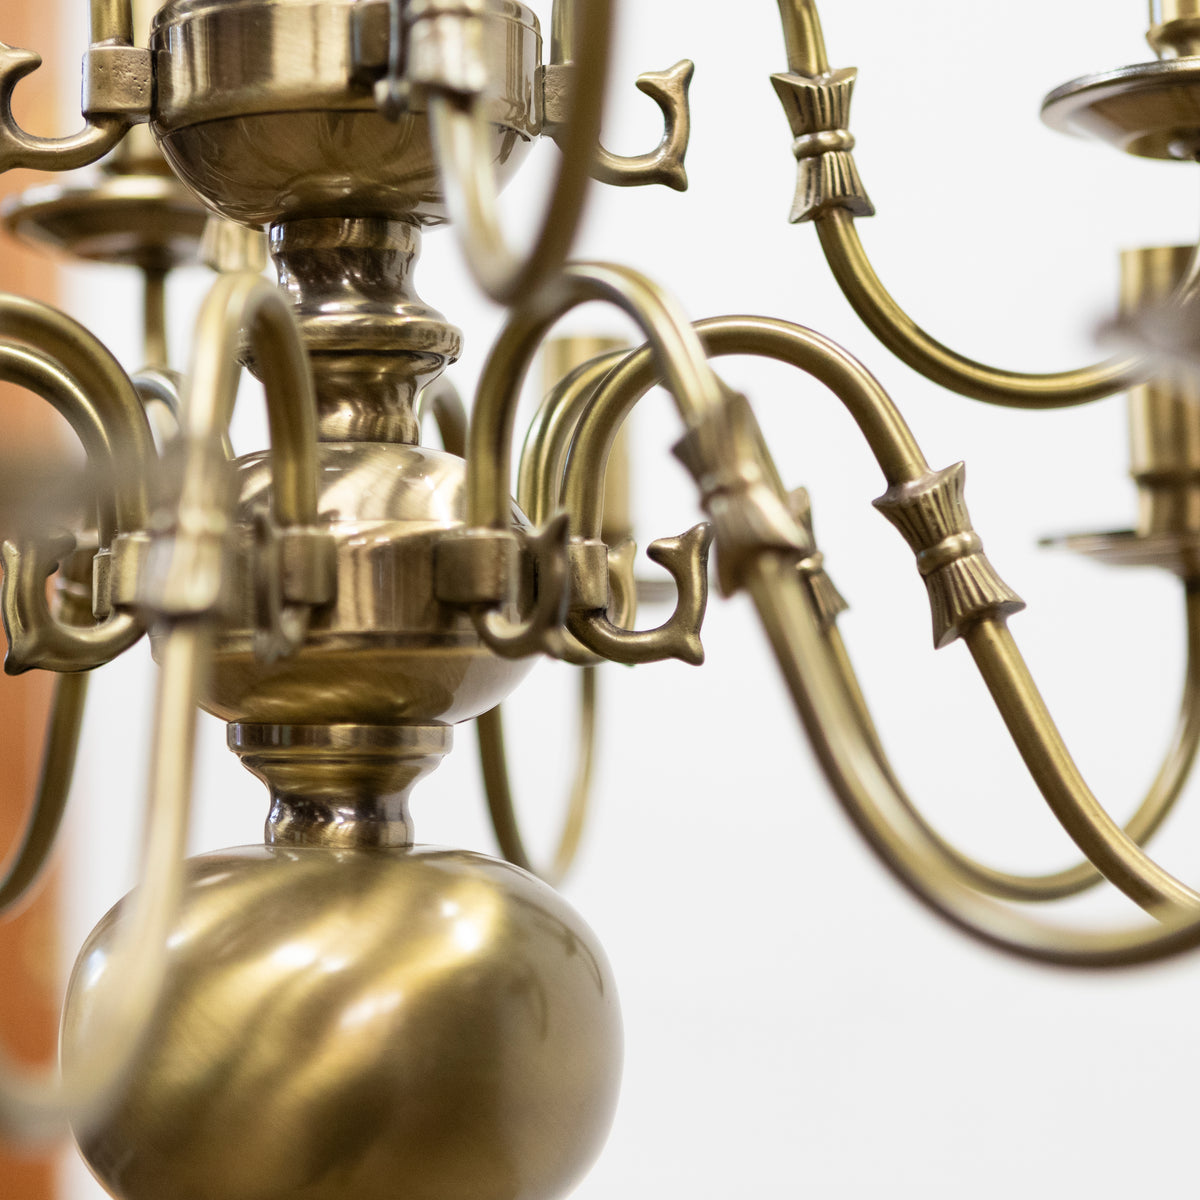 Reclaimed Dutch Style 12 Arm Brass Chandelier | Lambeth Palace | The Architectural Forum